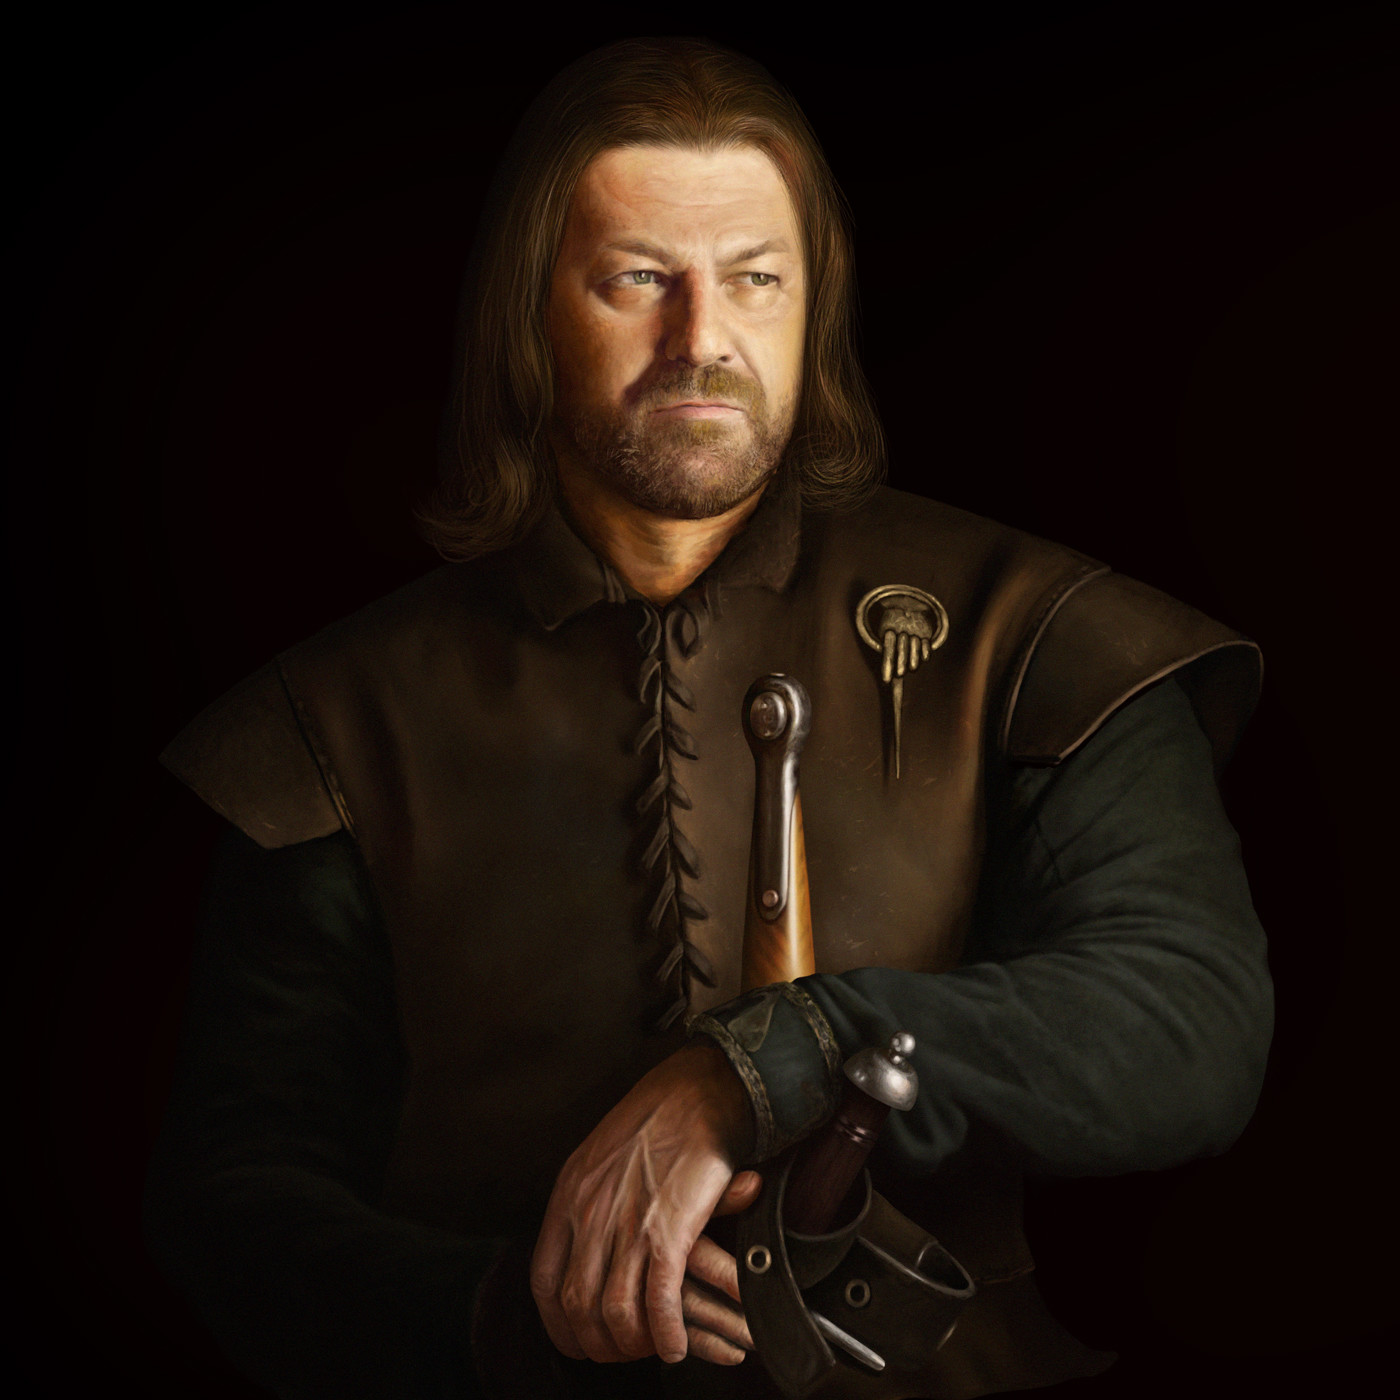 1920x1080 / 1920x1080 game of thrones ned stark iron throne wallpaper JPG  525 kB - Coolwallpapers.me!